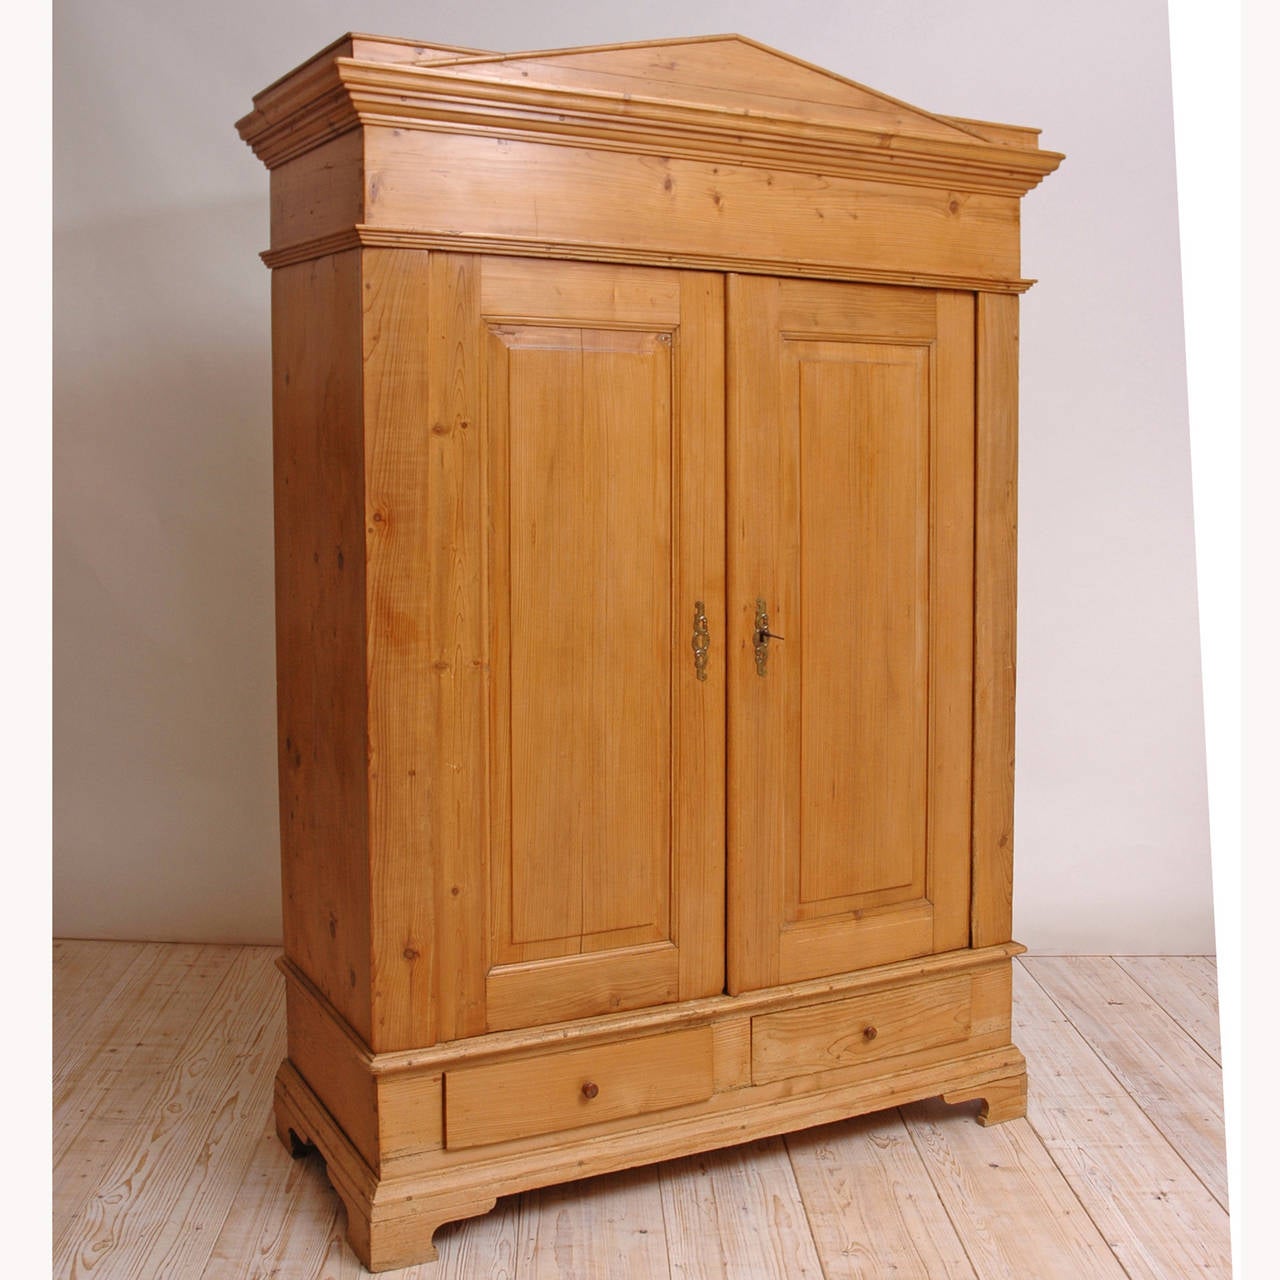 A fine German pine armoire with pegged construction from the Empire/ Biedermeier period with pediment top, two raised paneled doors, two exterior drawers and resting on bracket feet. Interior was modified by our workshop to include retractable doors